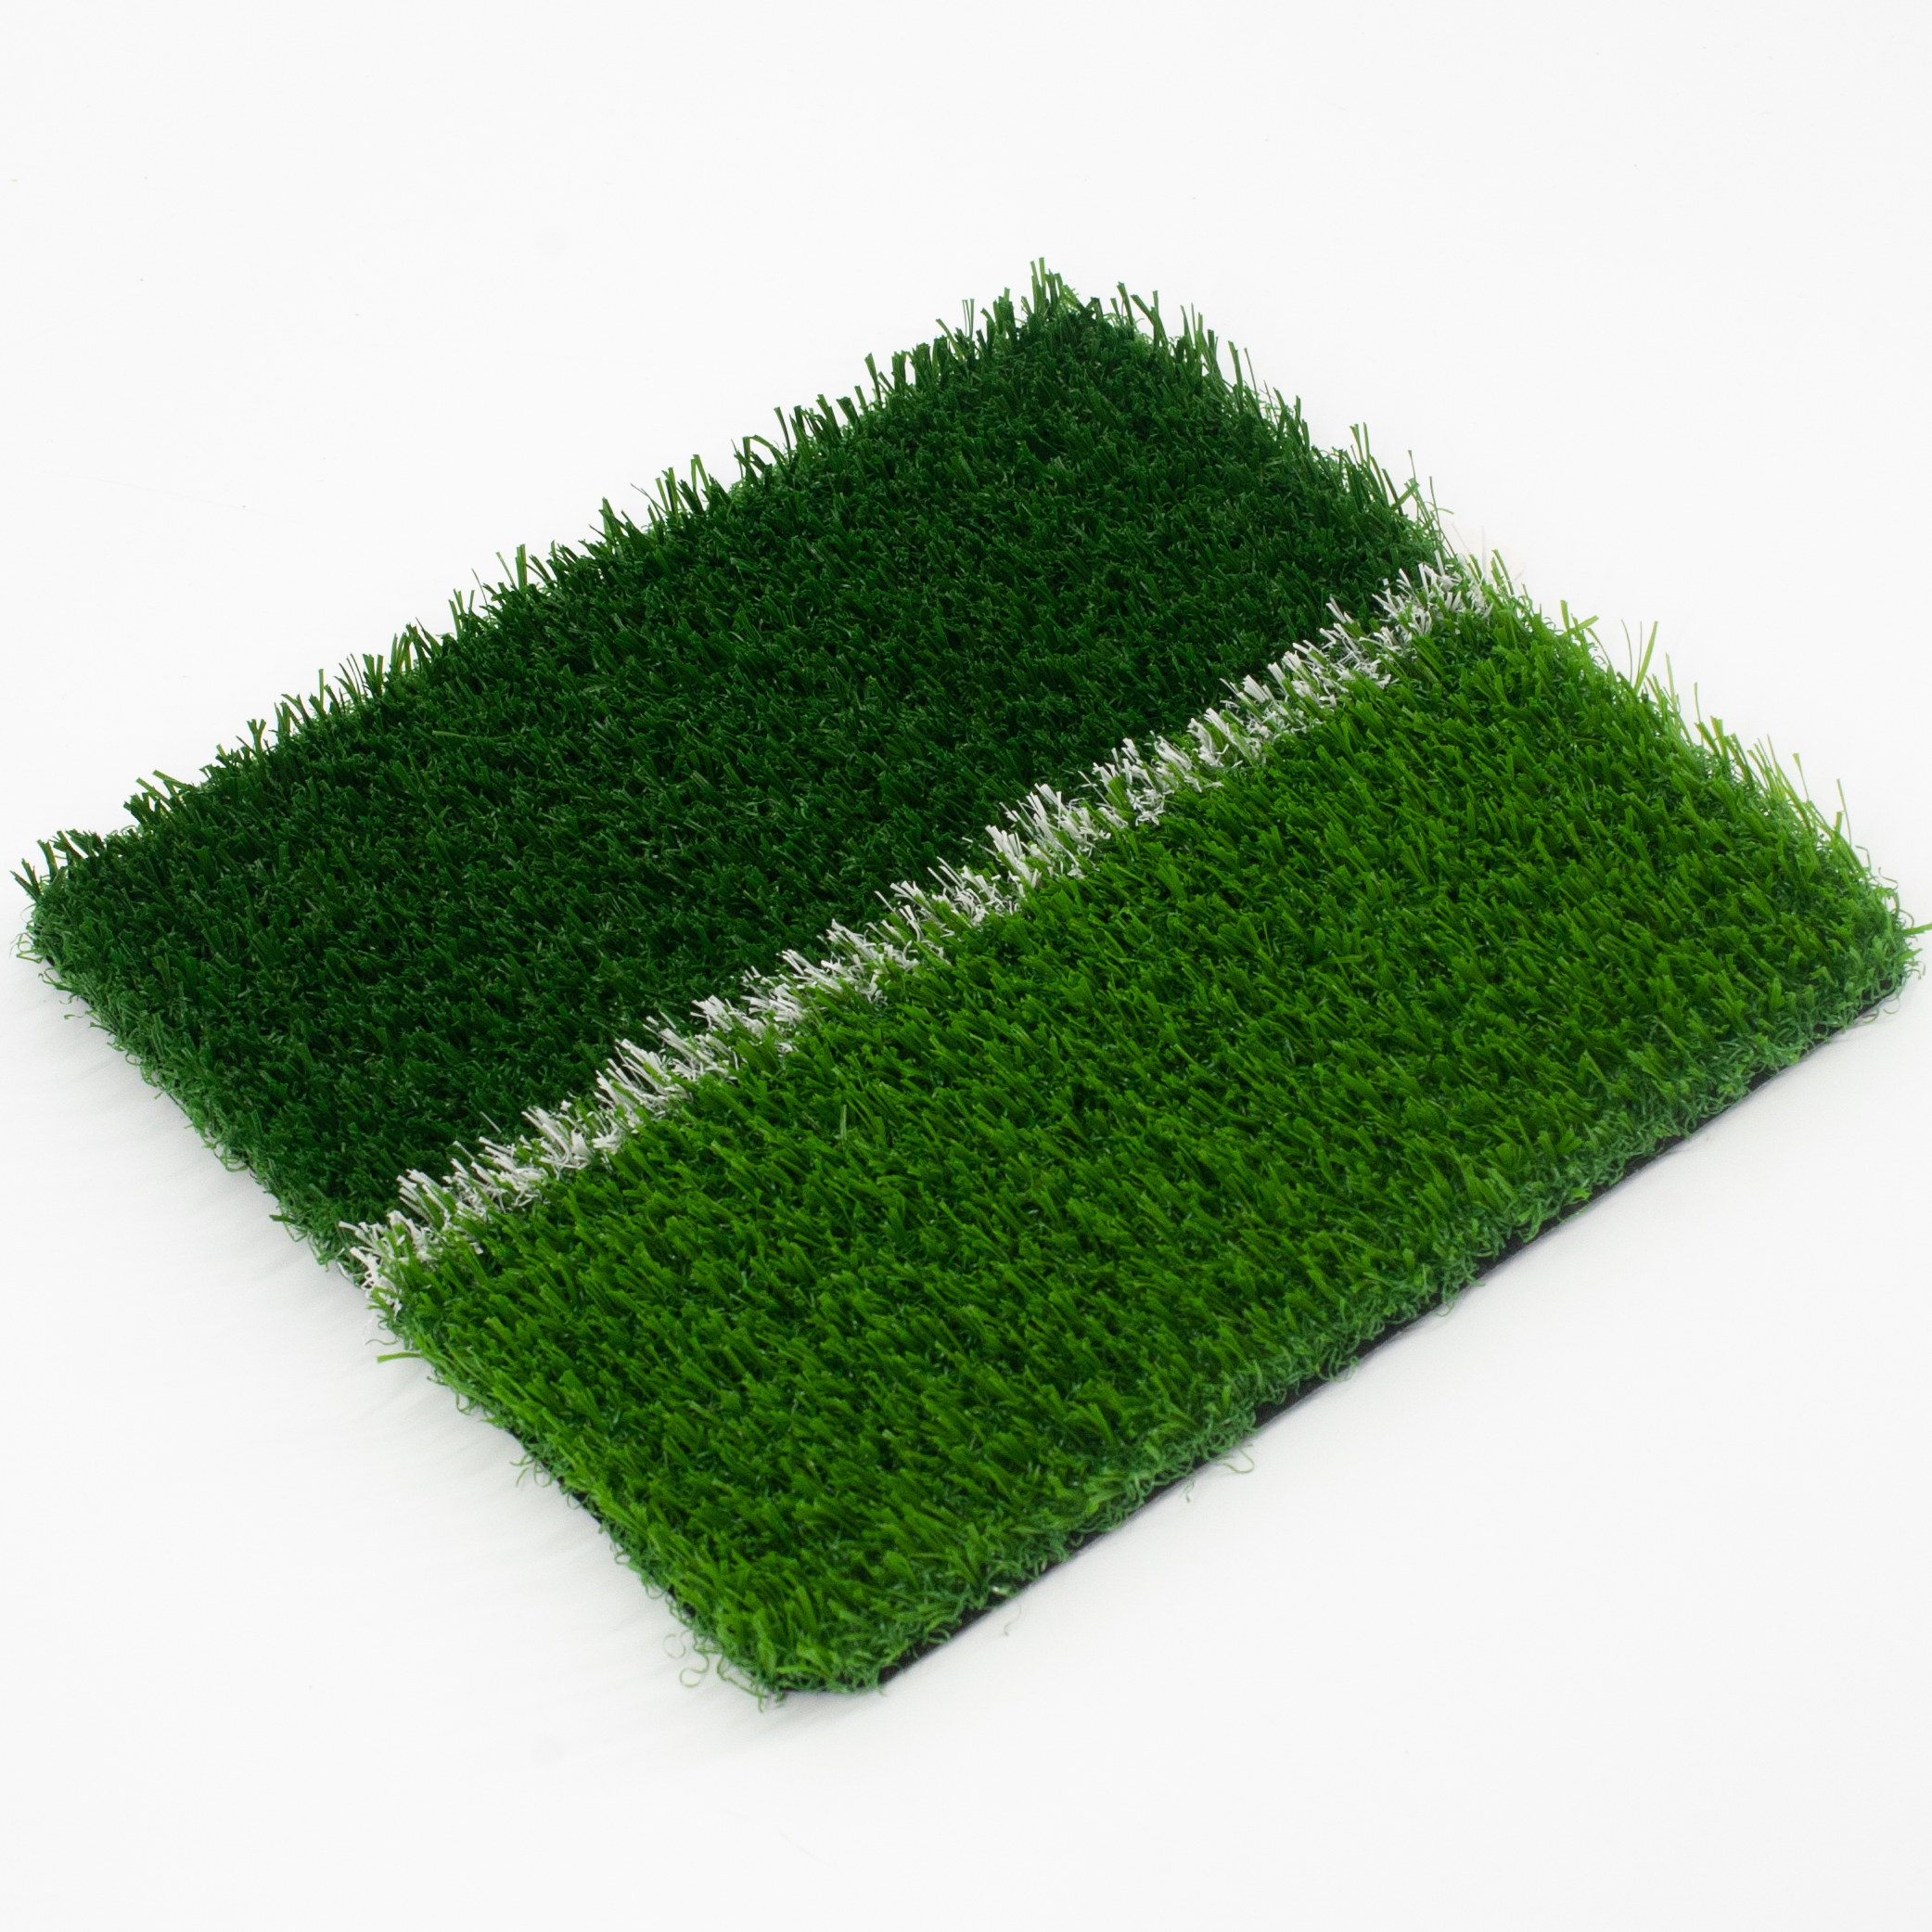 30mm Quality Artificial Turf for Soccer Field